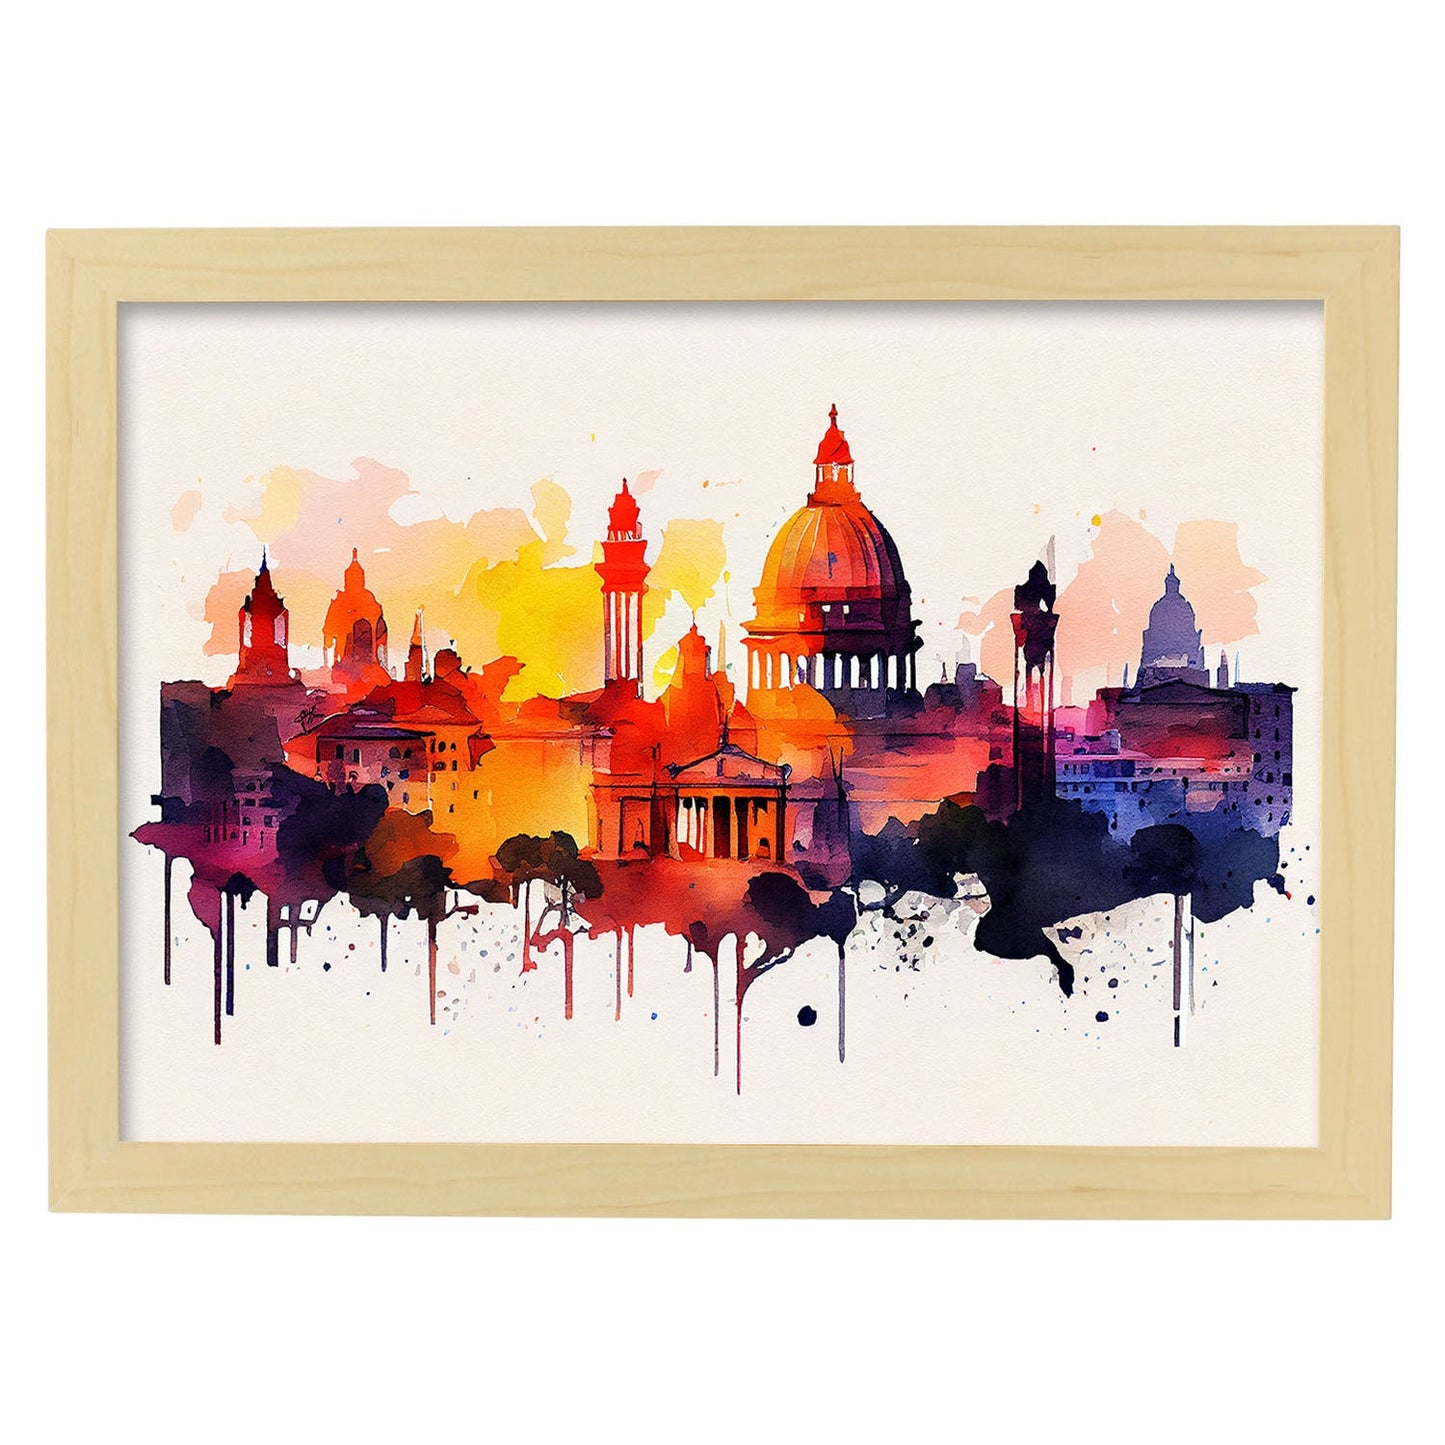 Nacnic watercolor of a skyline of the city of Rome_3. Aesthetic Wall Art Prints for Bedroom or Living Room Design.-Artwork-Nacnic-A4-Marco Madera Clara-Nacnic Estudio SL